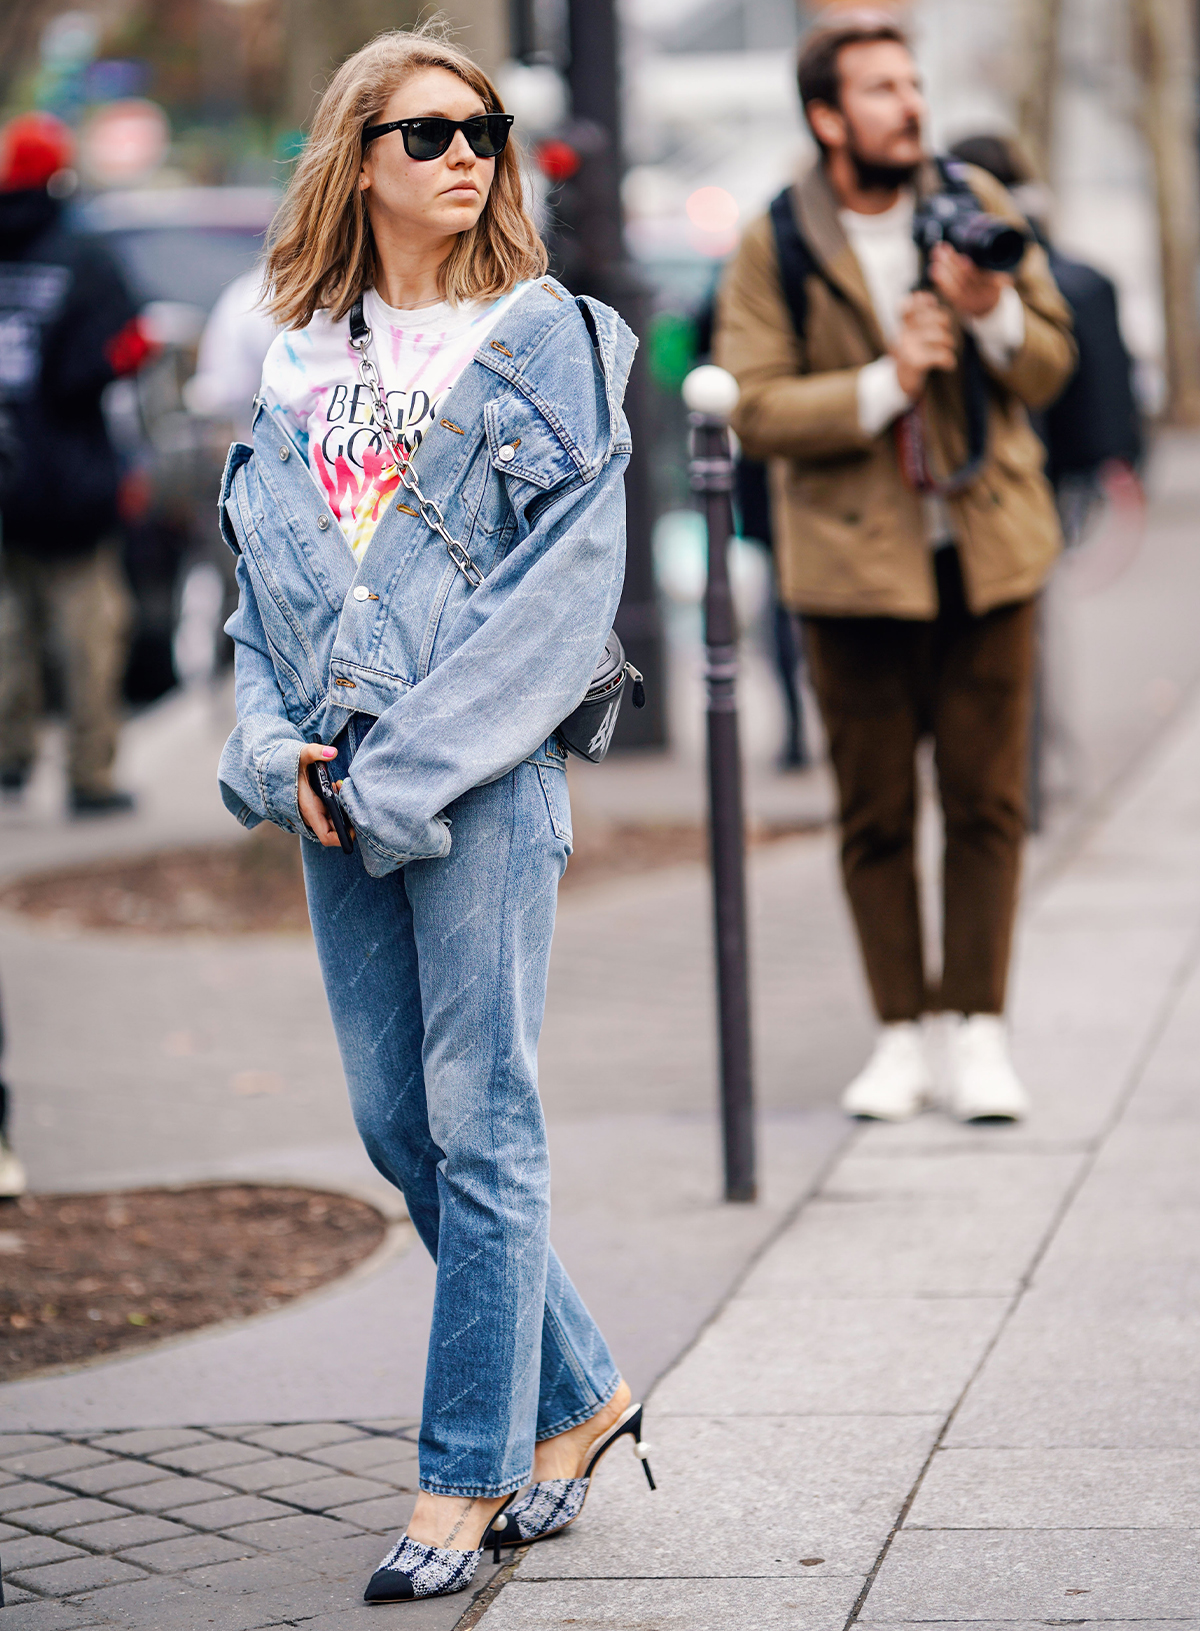 shirts to wear with a jean jacket